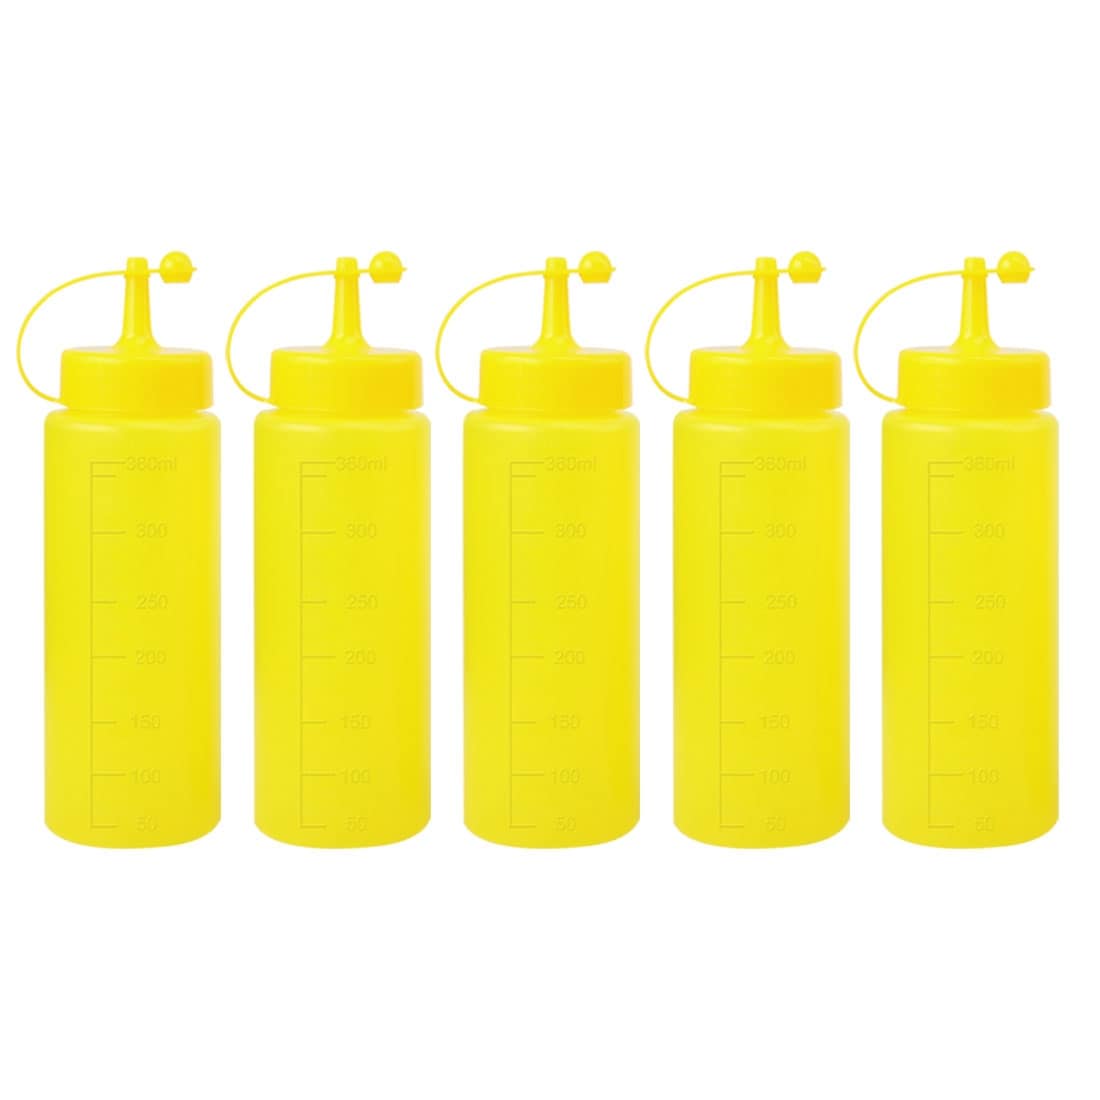 https://ak1.ostkcdn.com/images/products/is/images/direct/ce5e80ca8ac5b957046a4eb2af665c0ac4ec3227/5pcs-Plastic-12-16-24-Oz-Condiment-Squeeze-Bottles-with-Cap.jpg